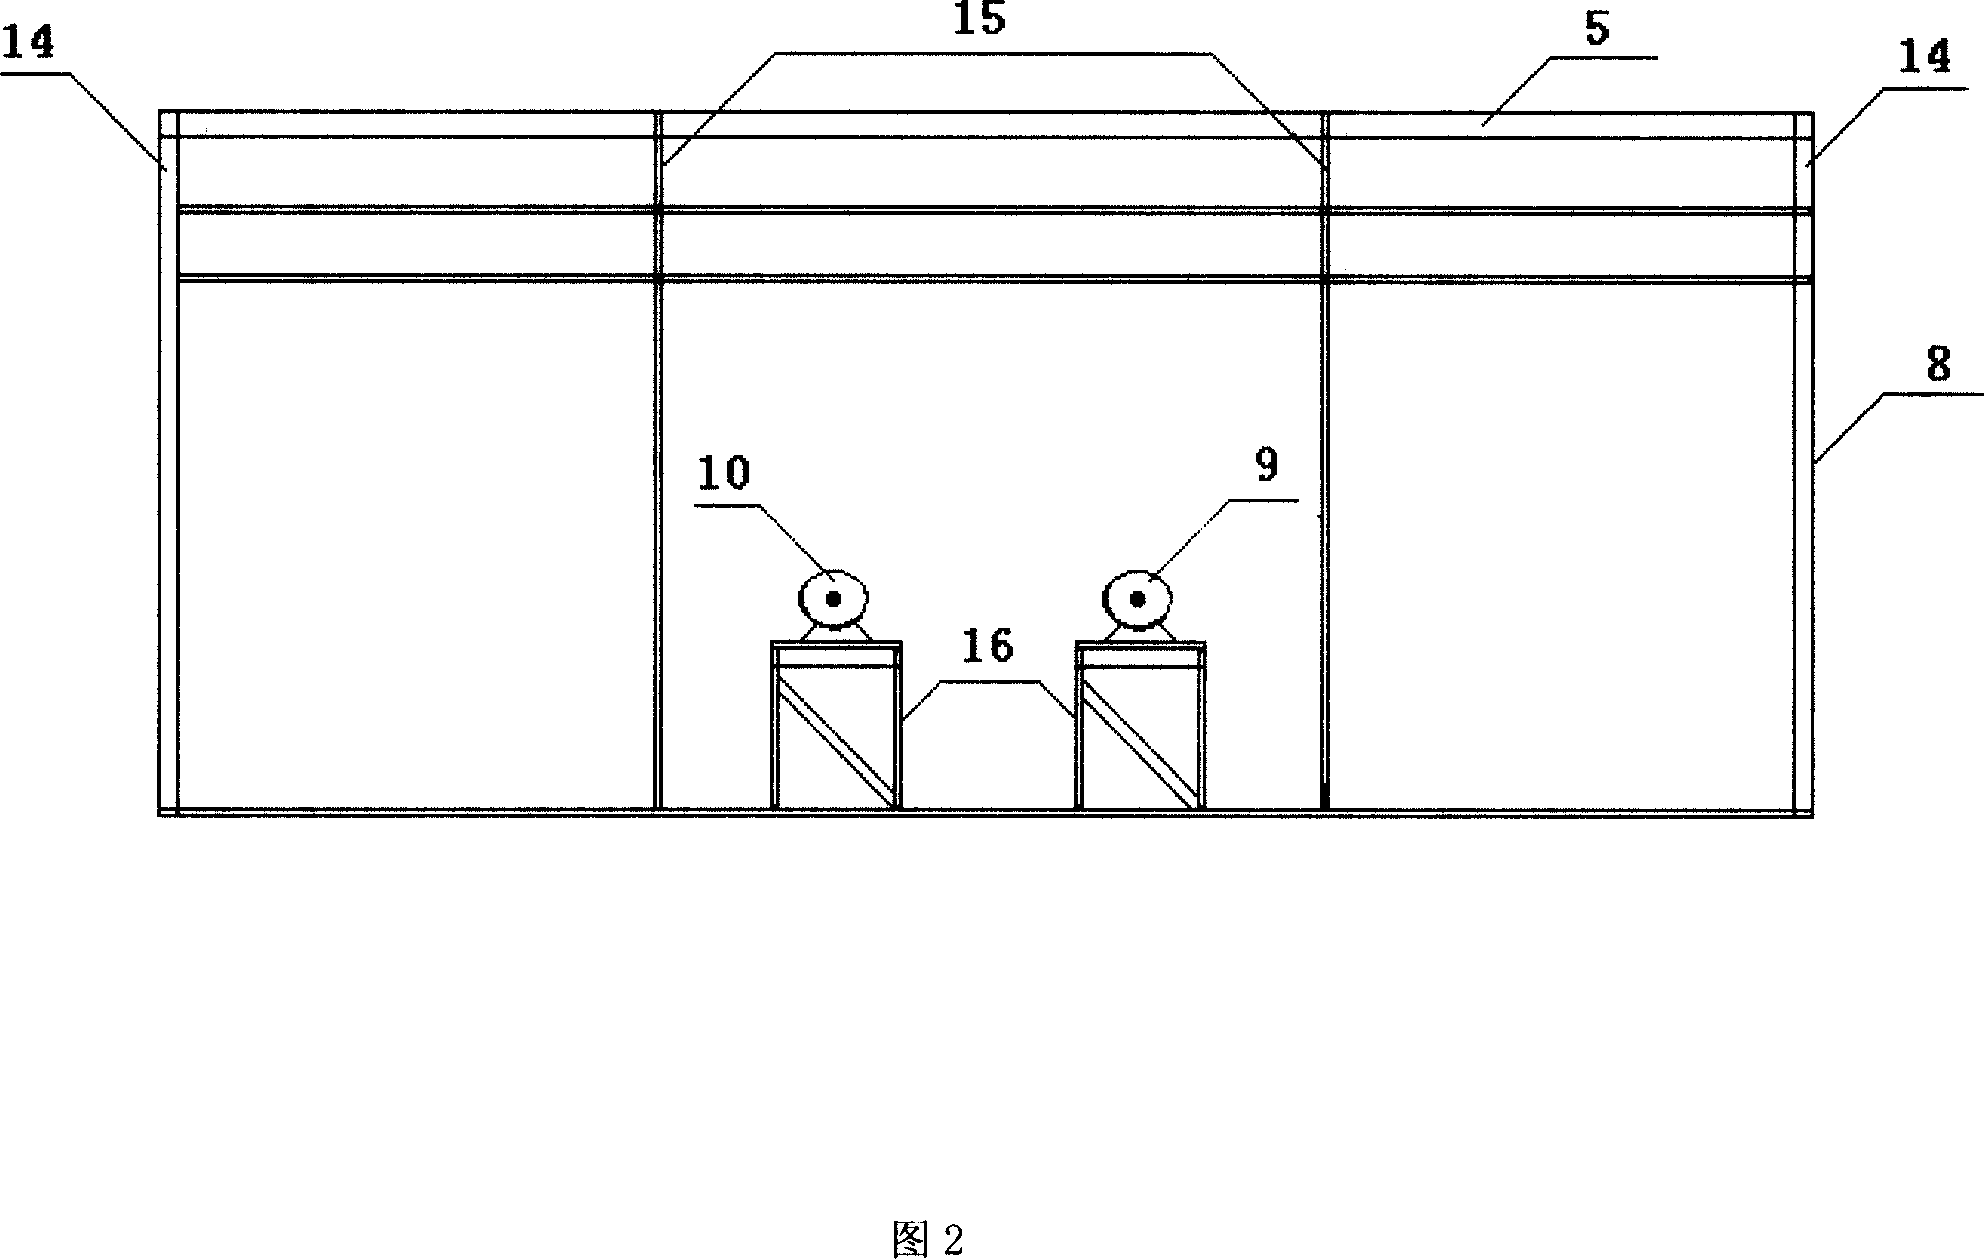 Method for cleaning electrolyte in the bottom of residual electrolysis anode